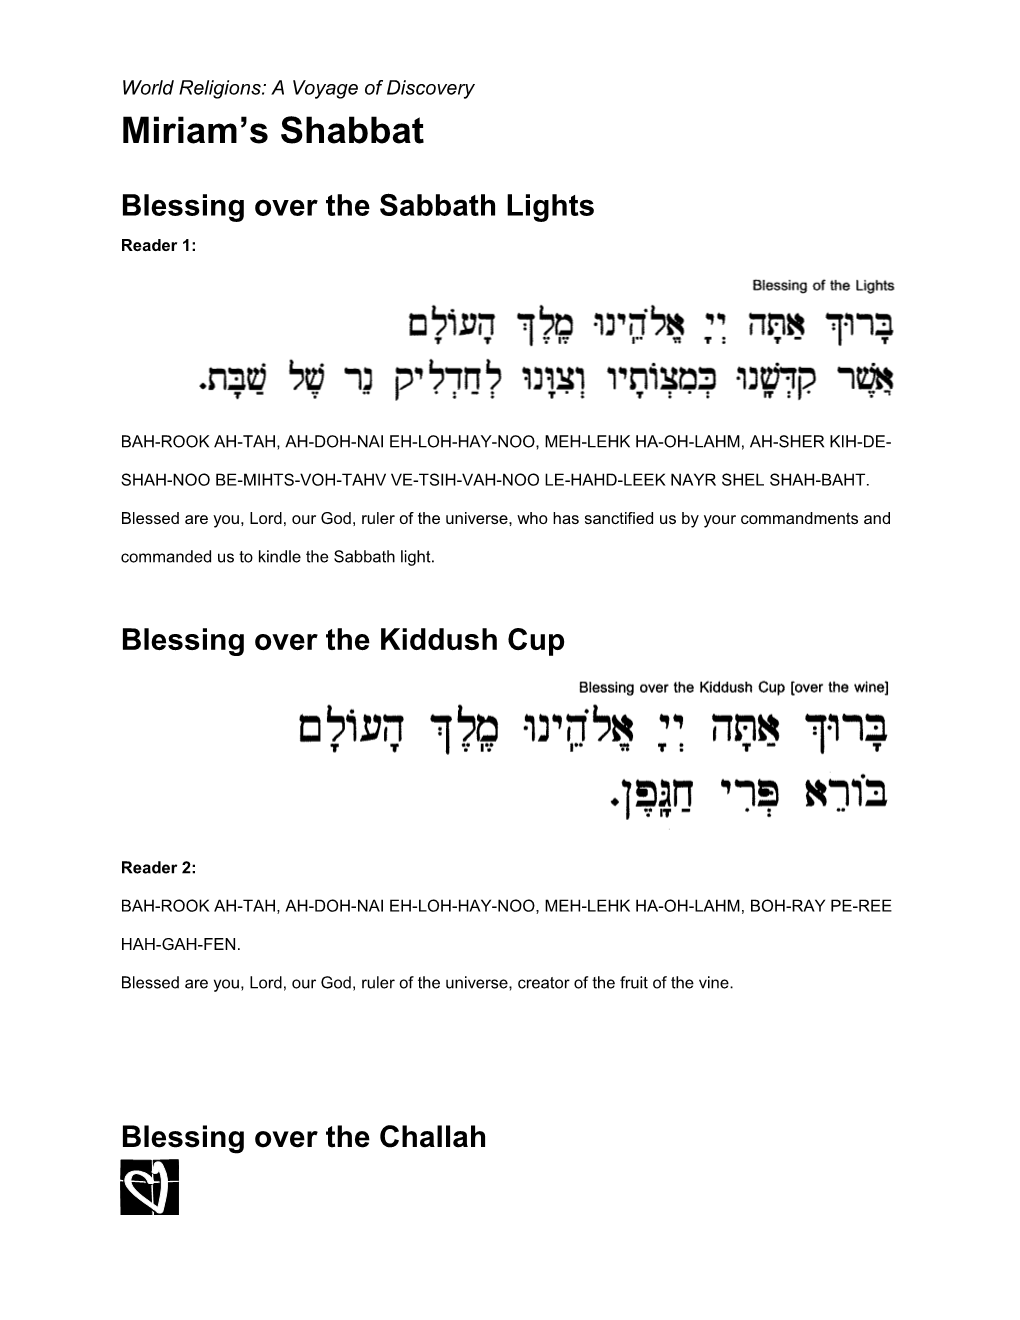 Blessing Over the Sabbath Lights